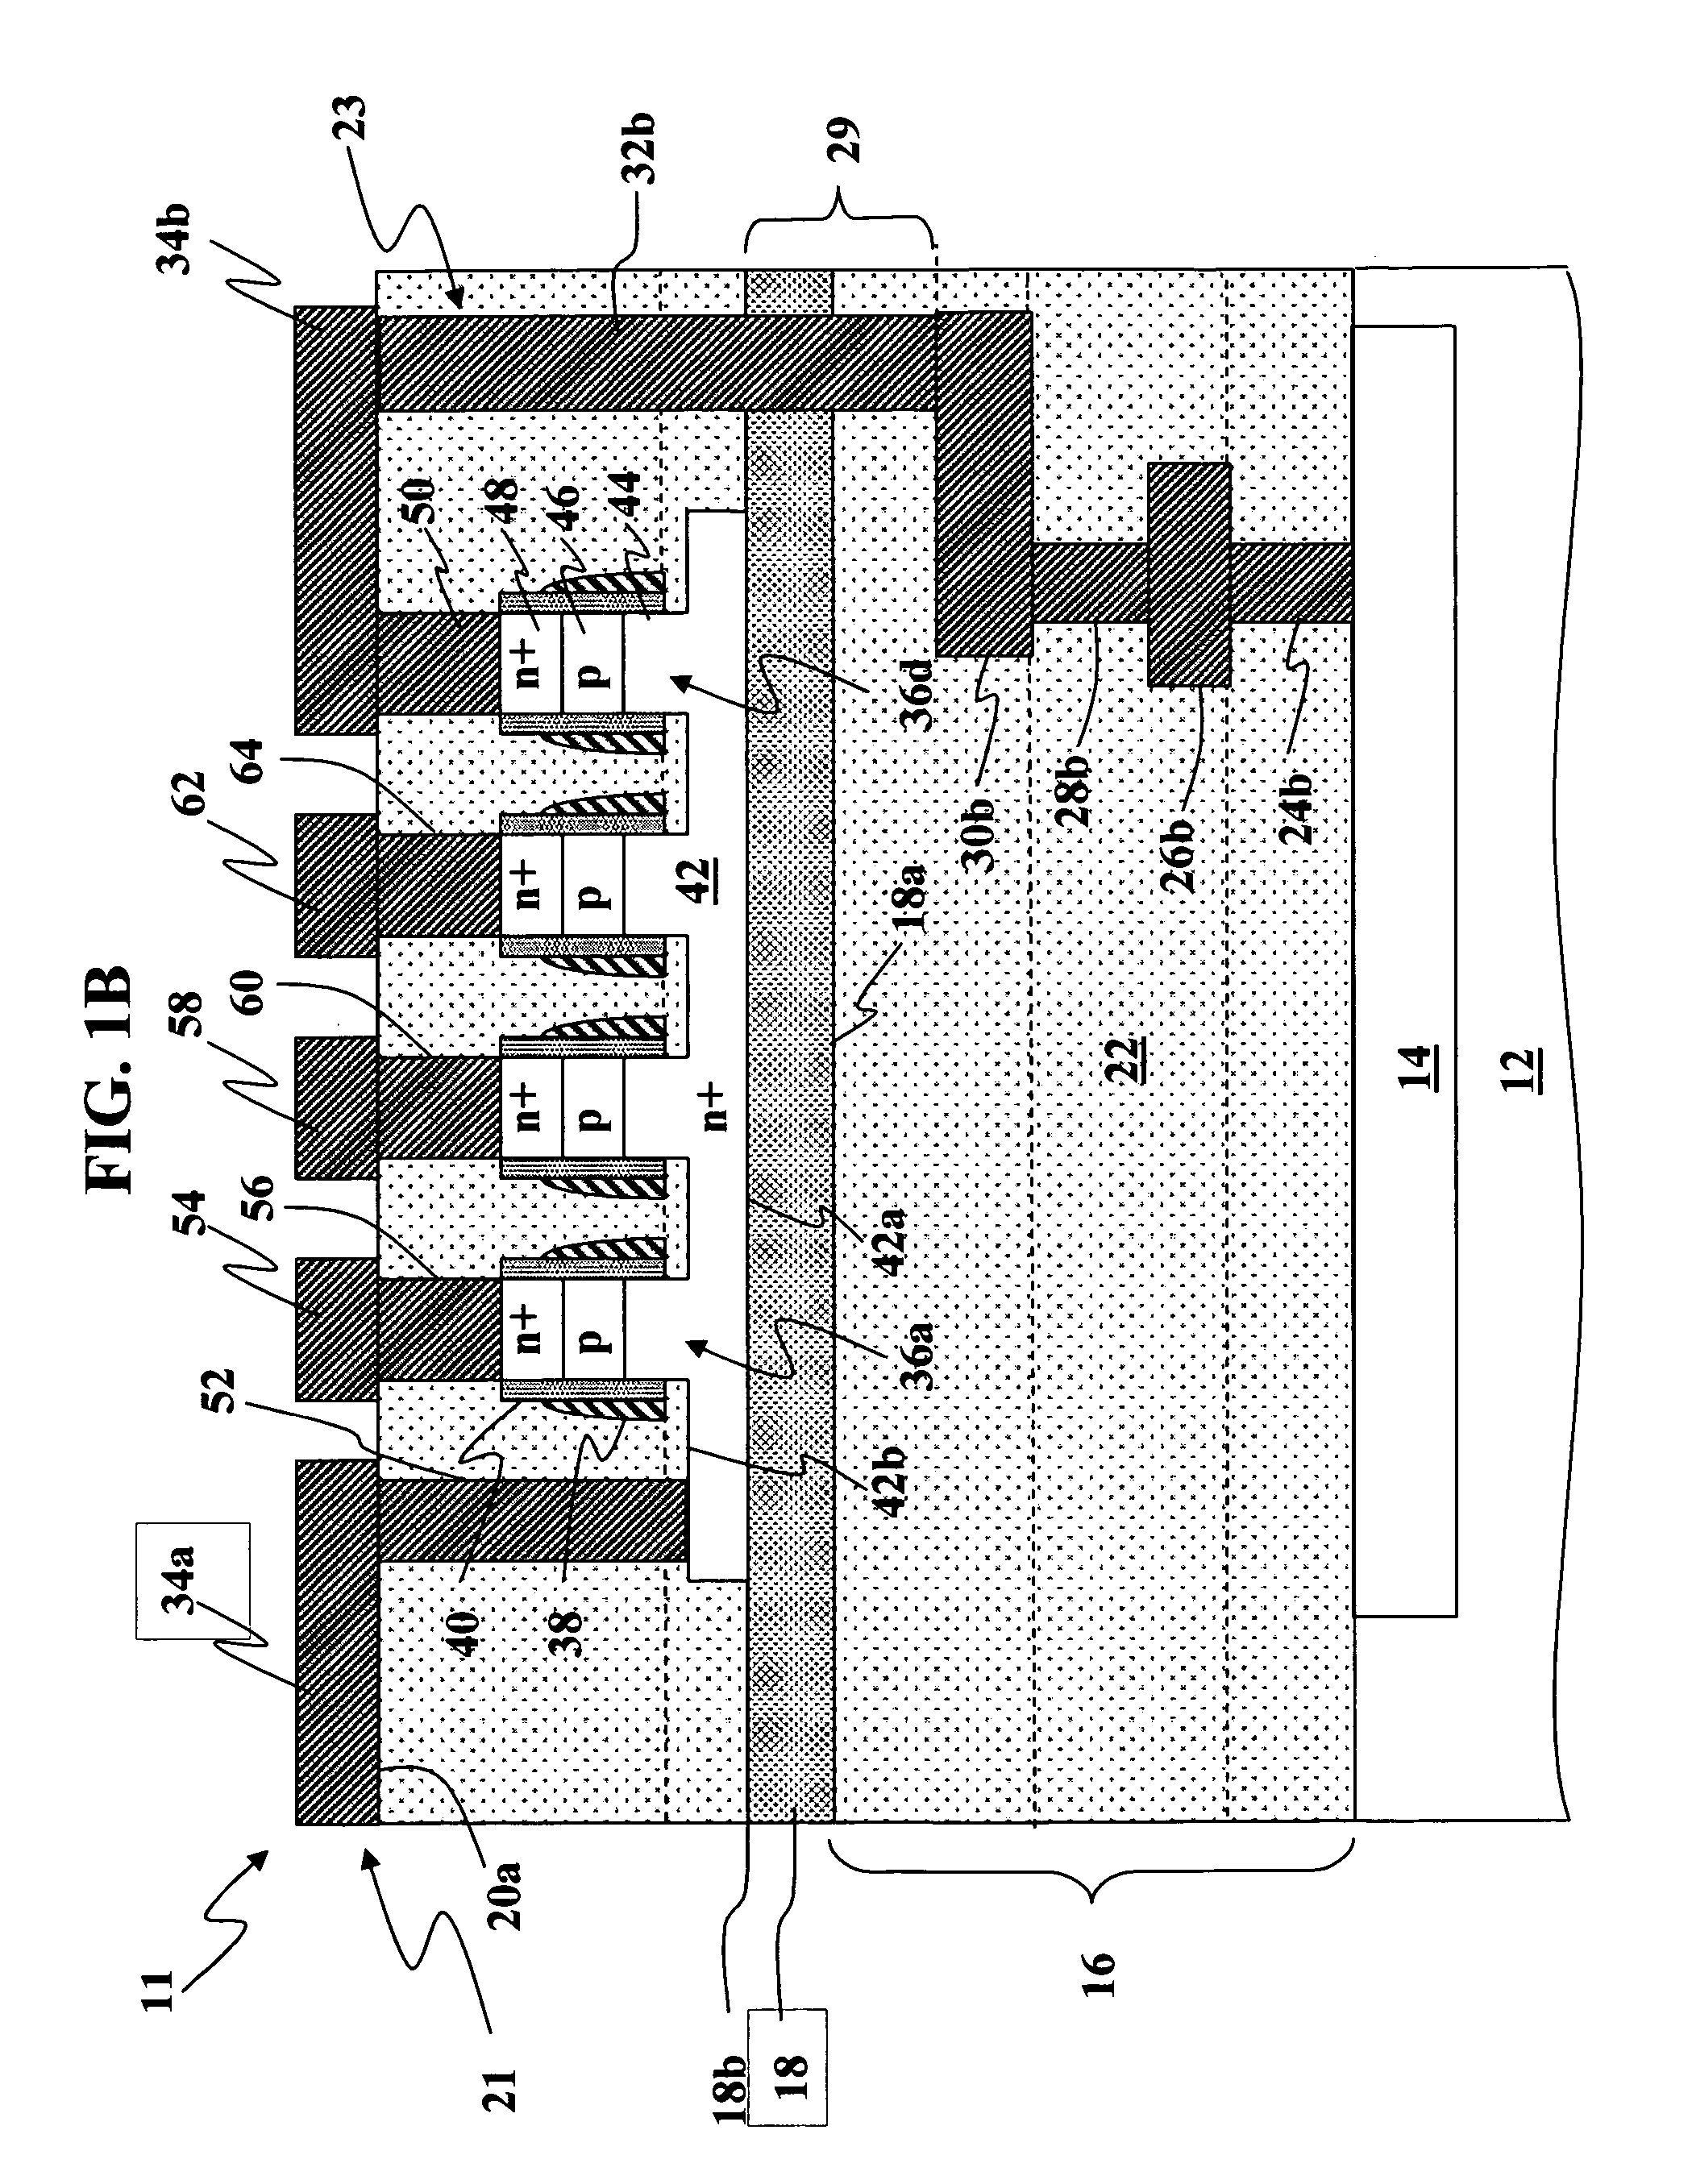 Semiconductor device with base support structure